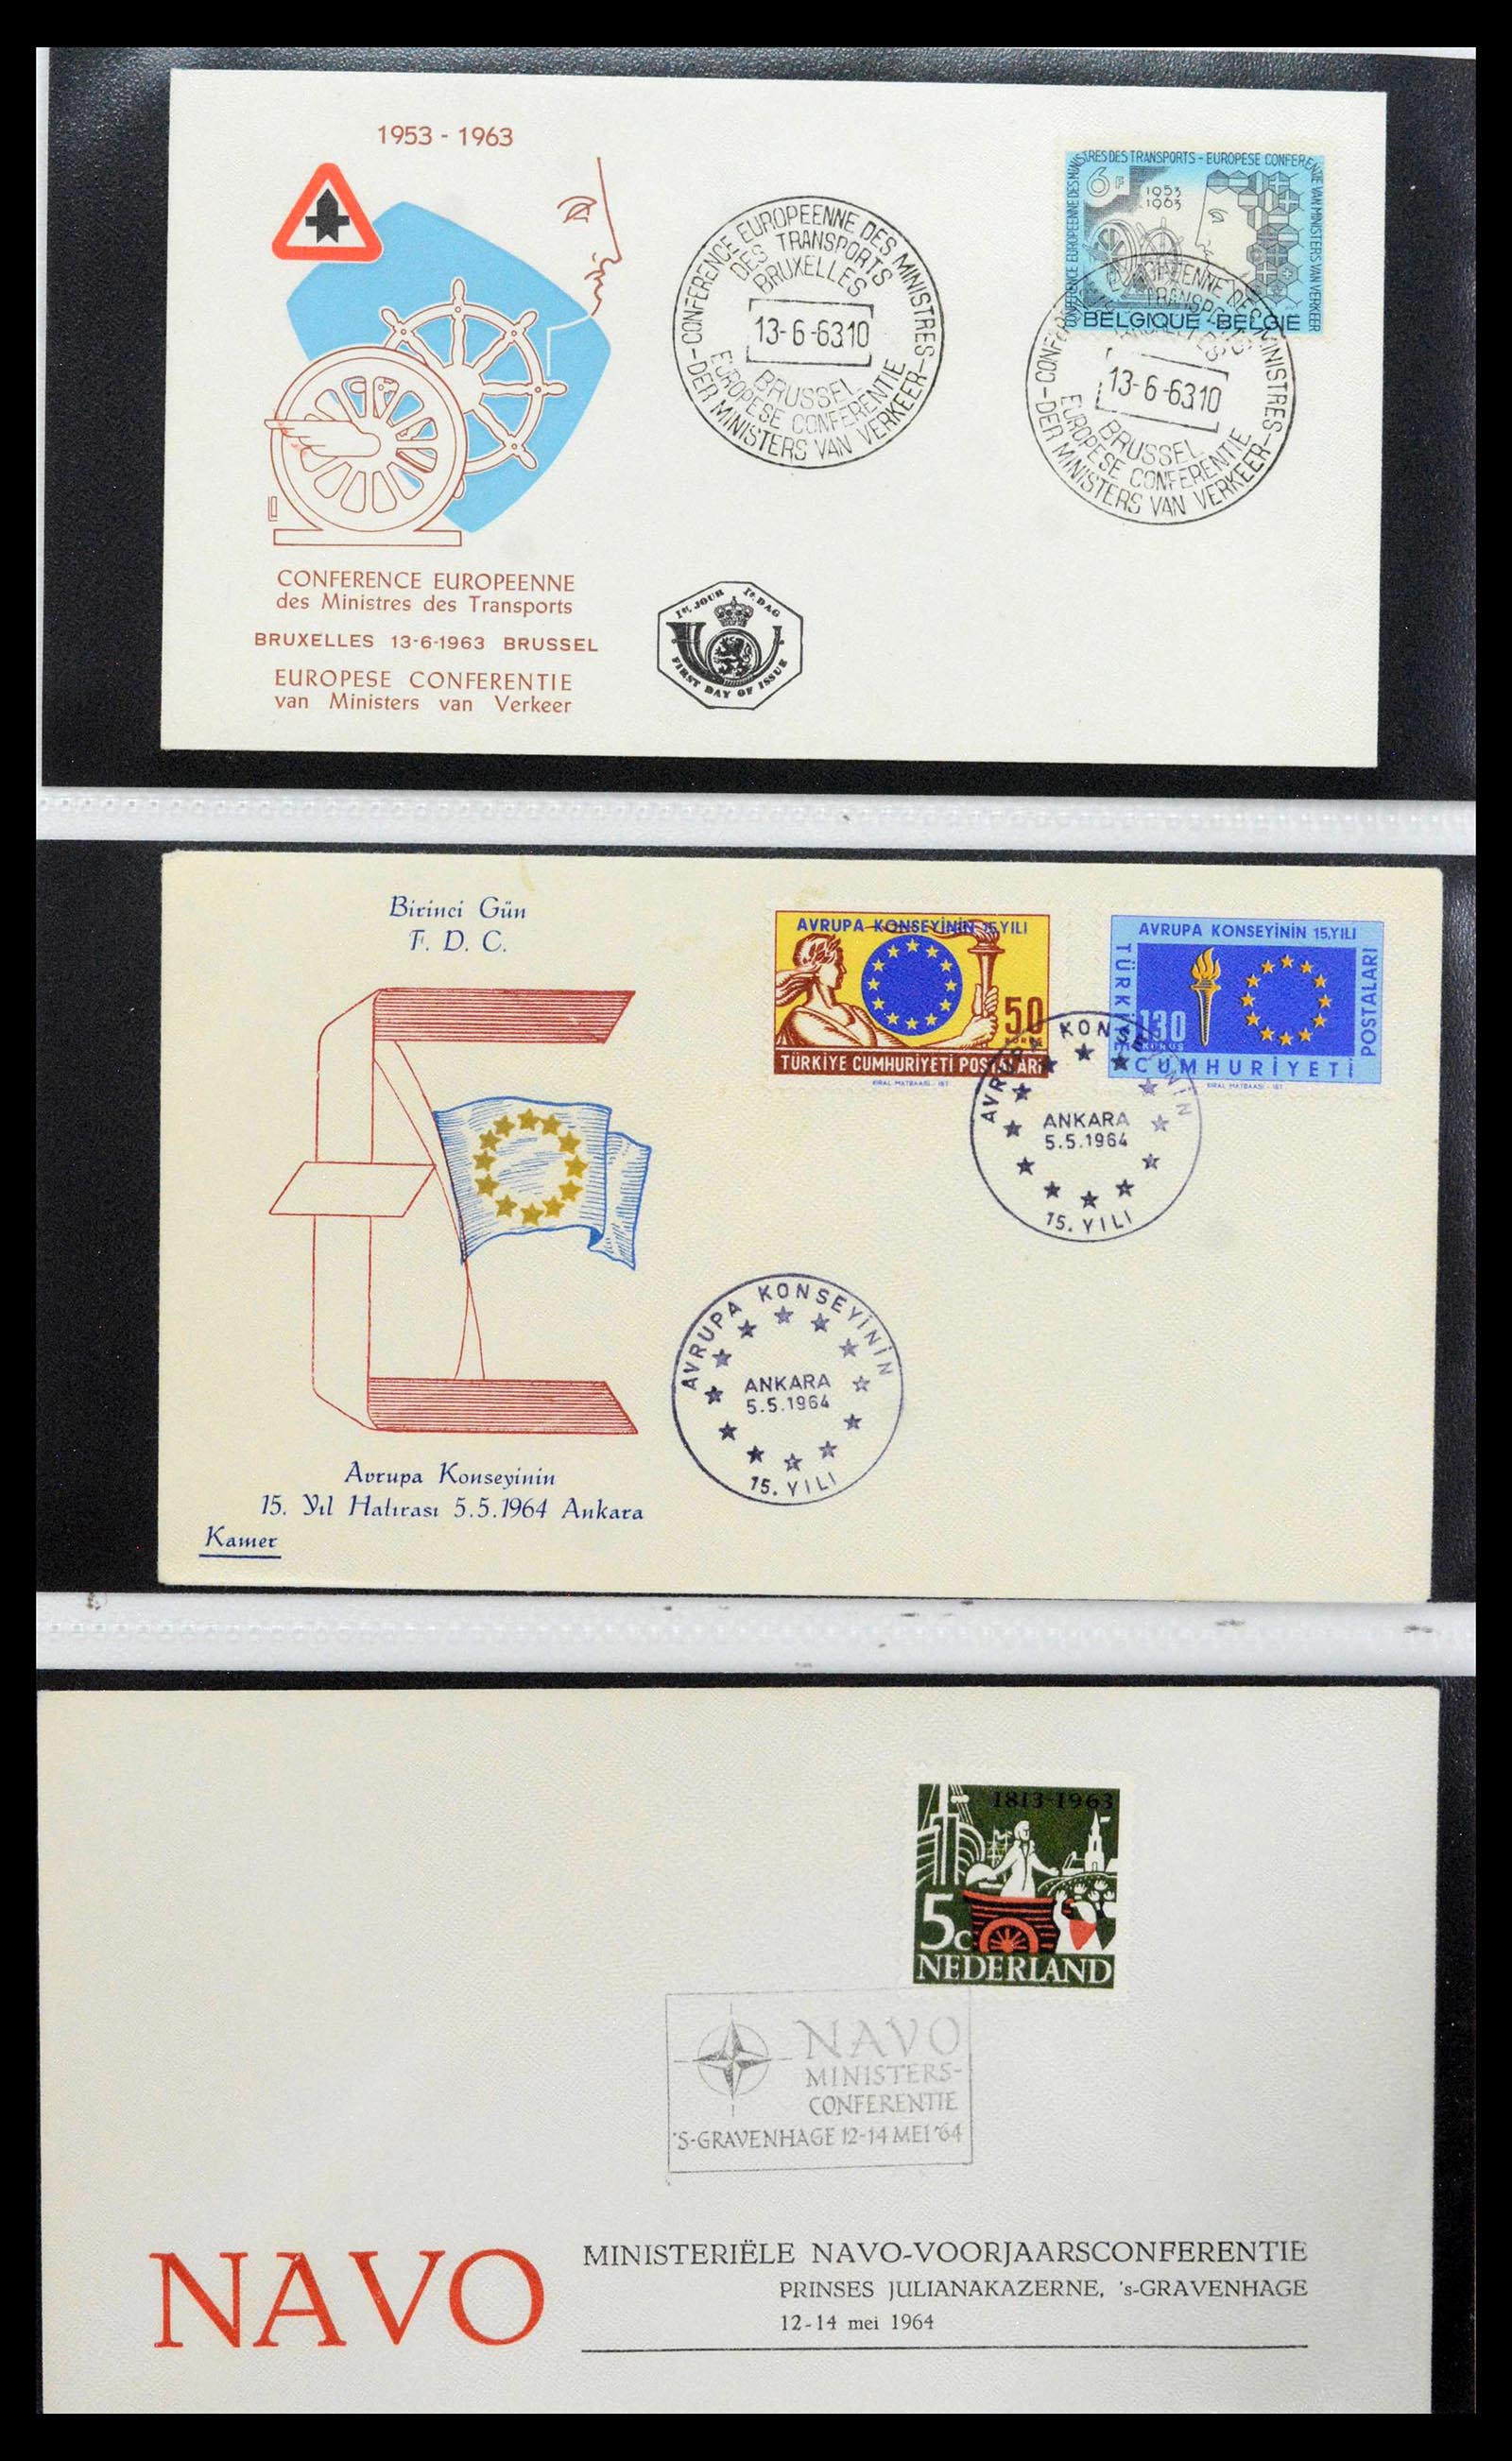 38559 0096 - Stamp collection 38559 Netherlands special first day covers.